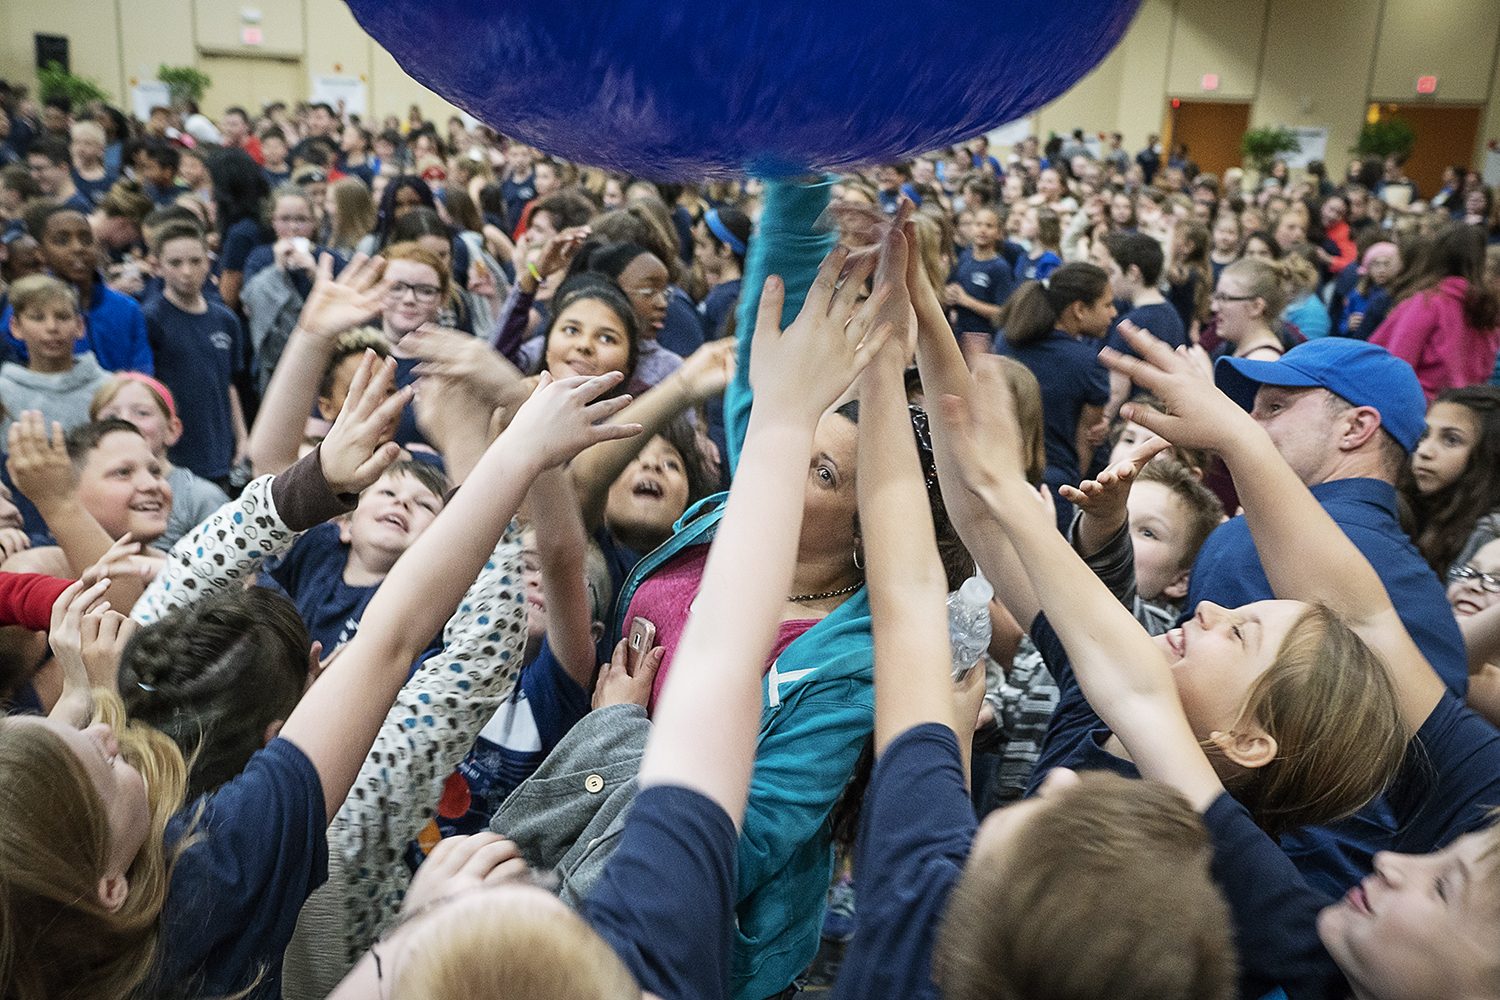 Flint, MI - Friday, May 4, 2018: Blueberry Ambassadors, teachers, and mentors bounce giant, inflated blueberries around the room before the beginning of the program for the 5th Annual Blueberry Ambassador Awards Party at the Riverfront Banquet Center